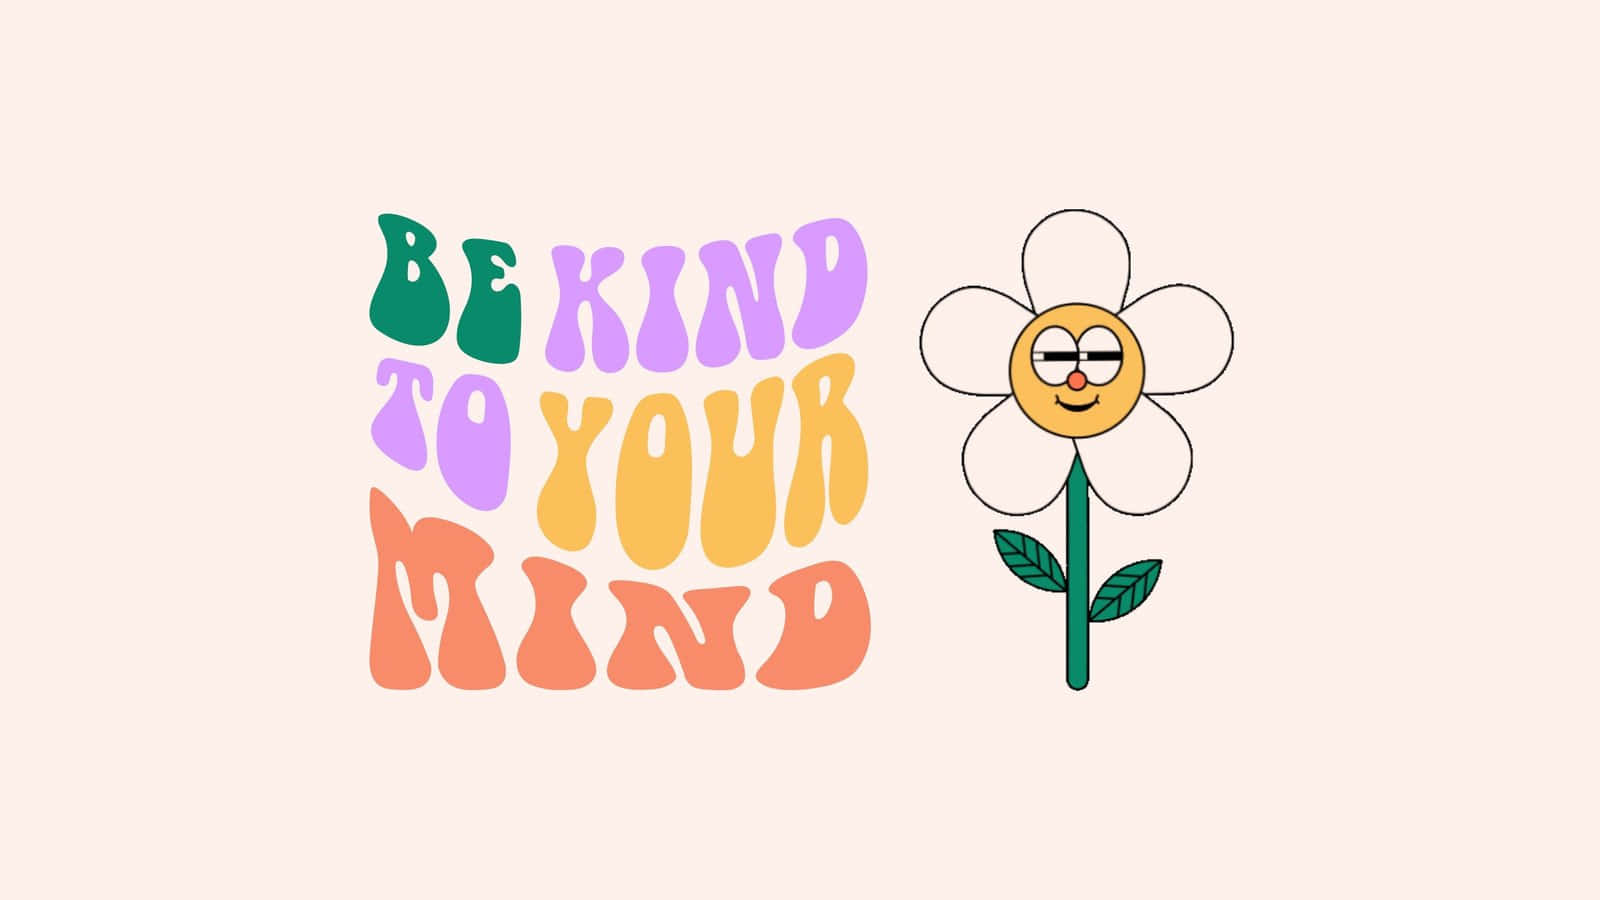 "Inspiring Motto for Mental Health - Be Kind to Your Mind." Wallpaper